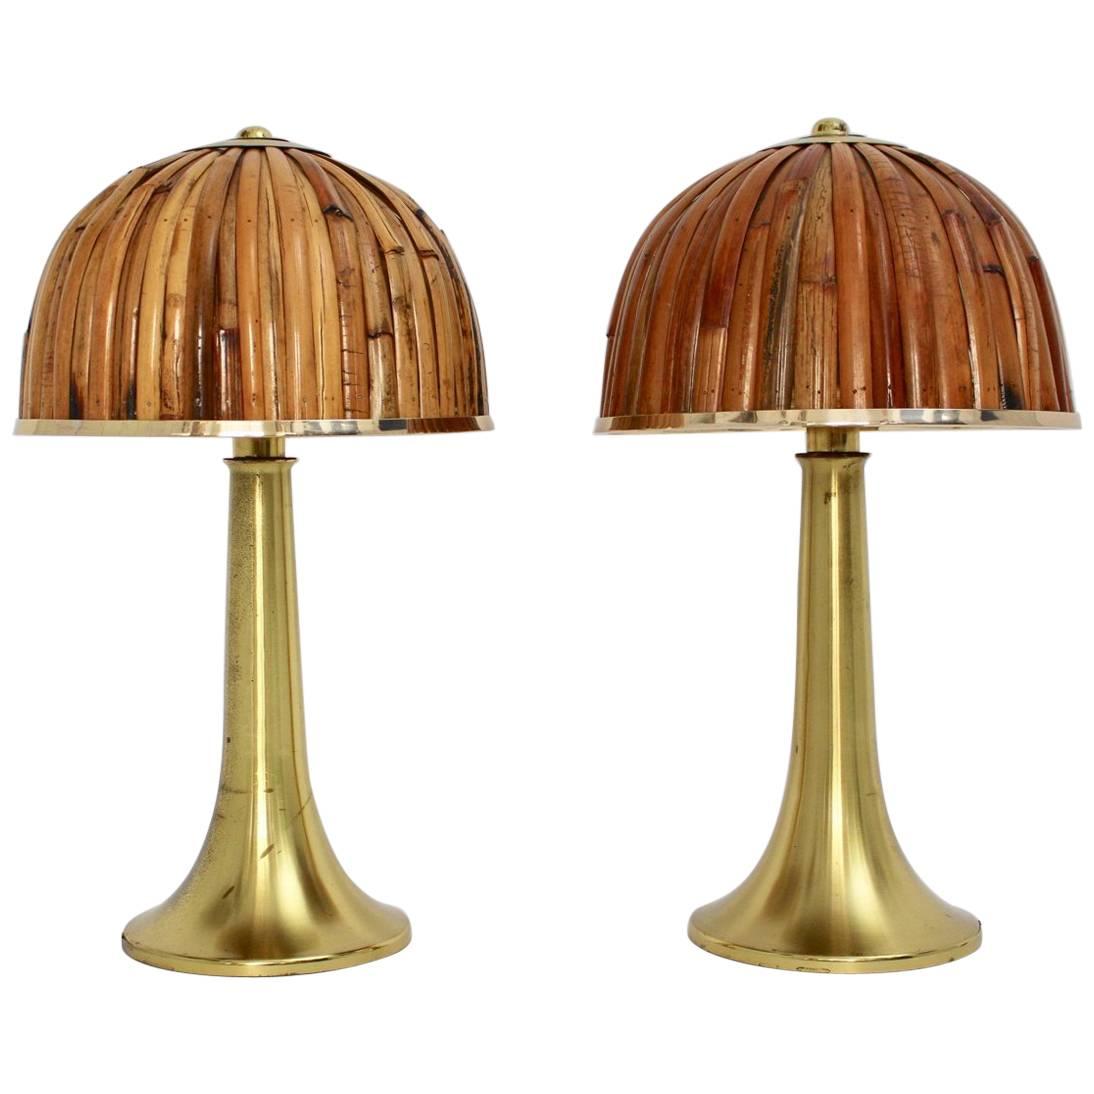 Gabriella Crespi Fungo Table Lamps from the Rising Sun Series, 1973, Italy